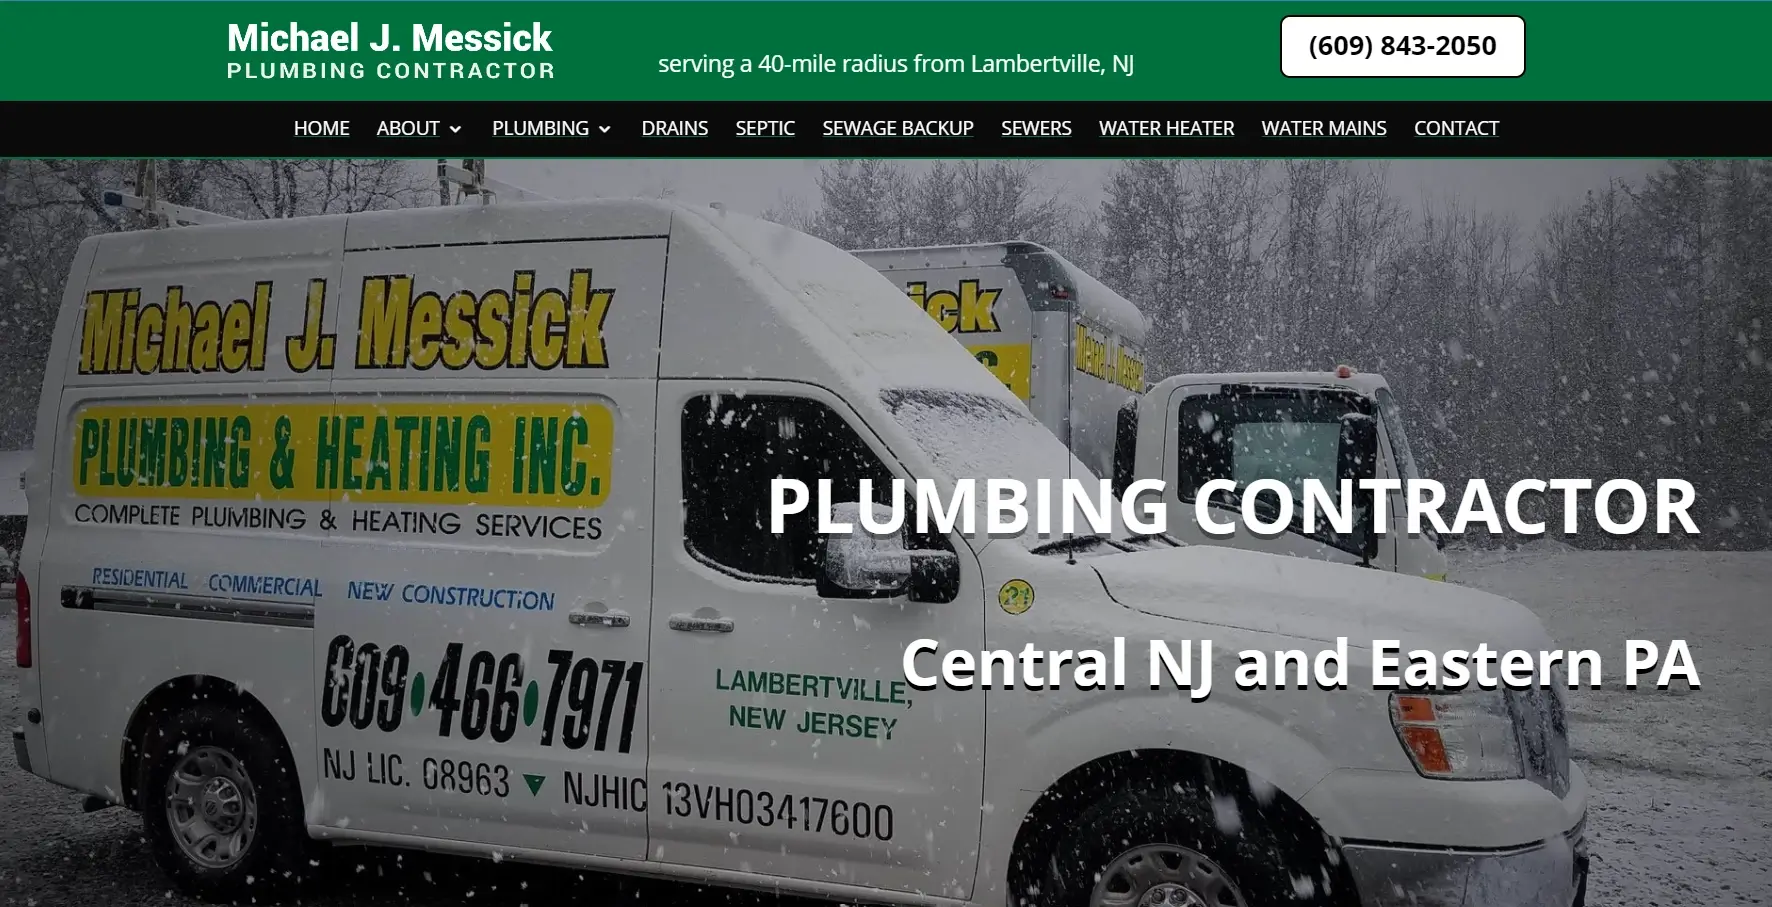 Make Your Plumbing Website Mobile-Friendly